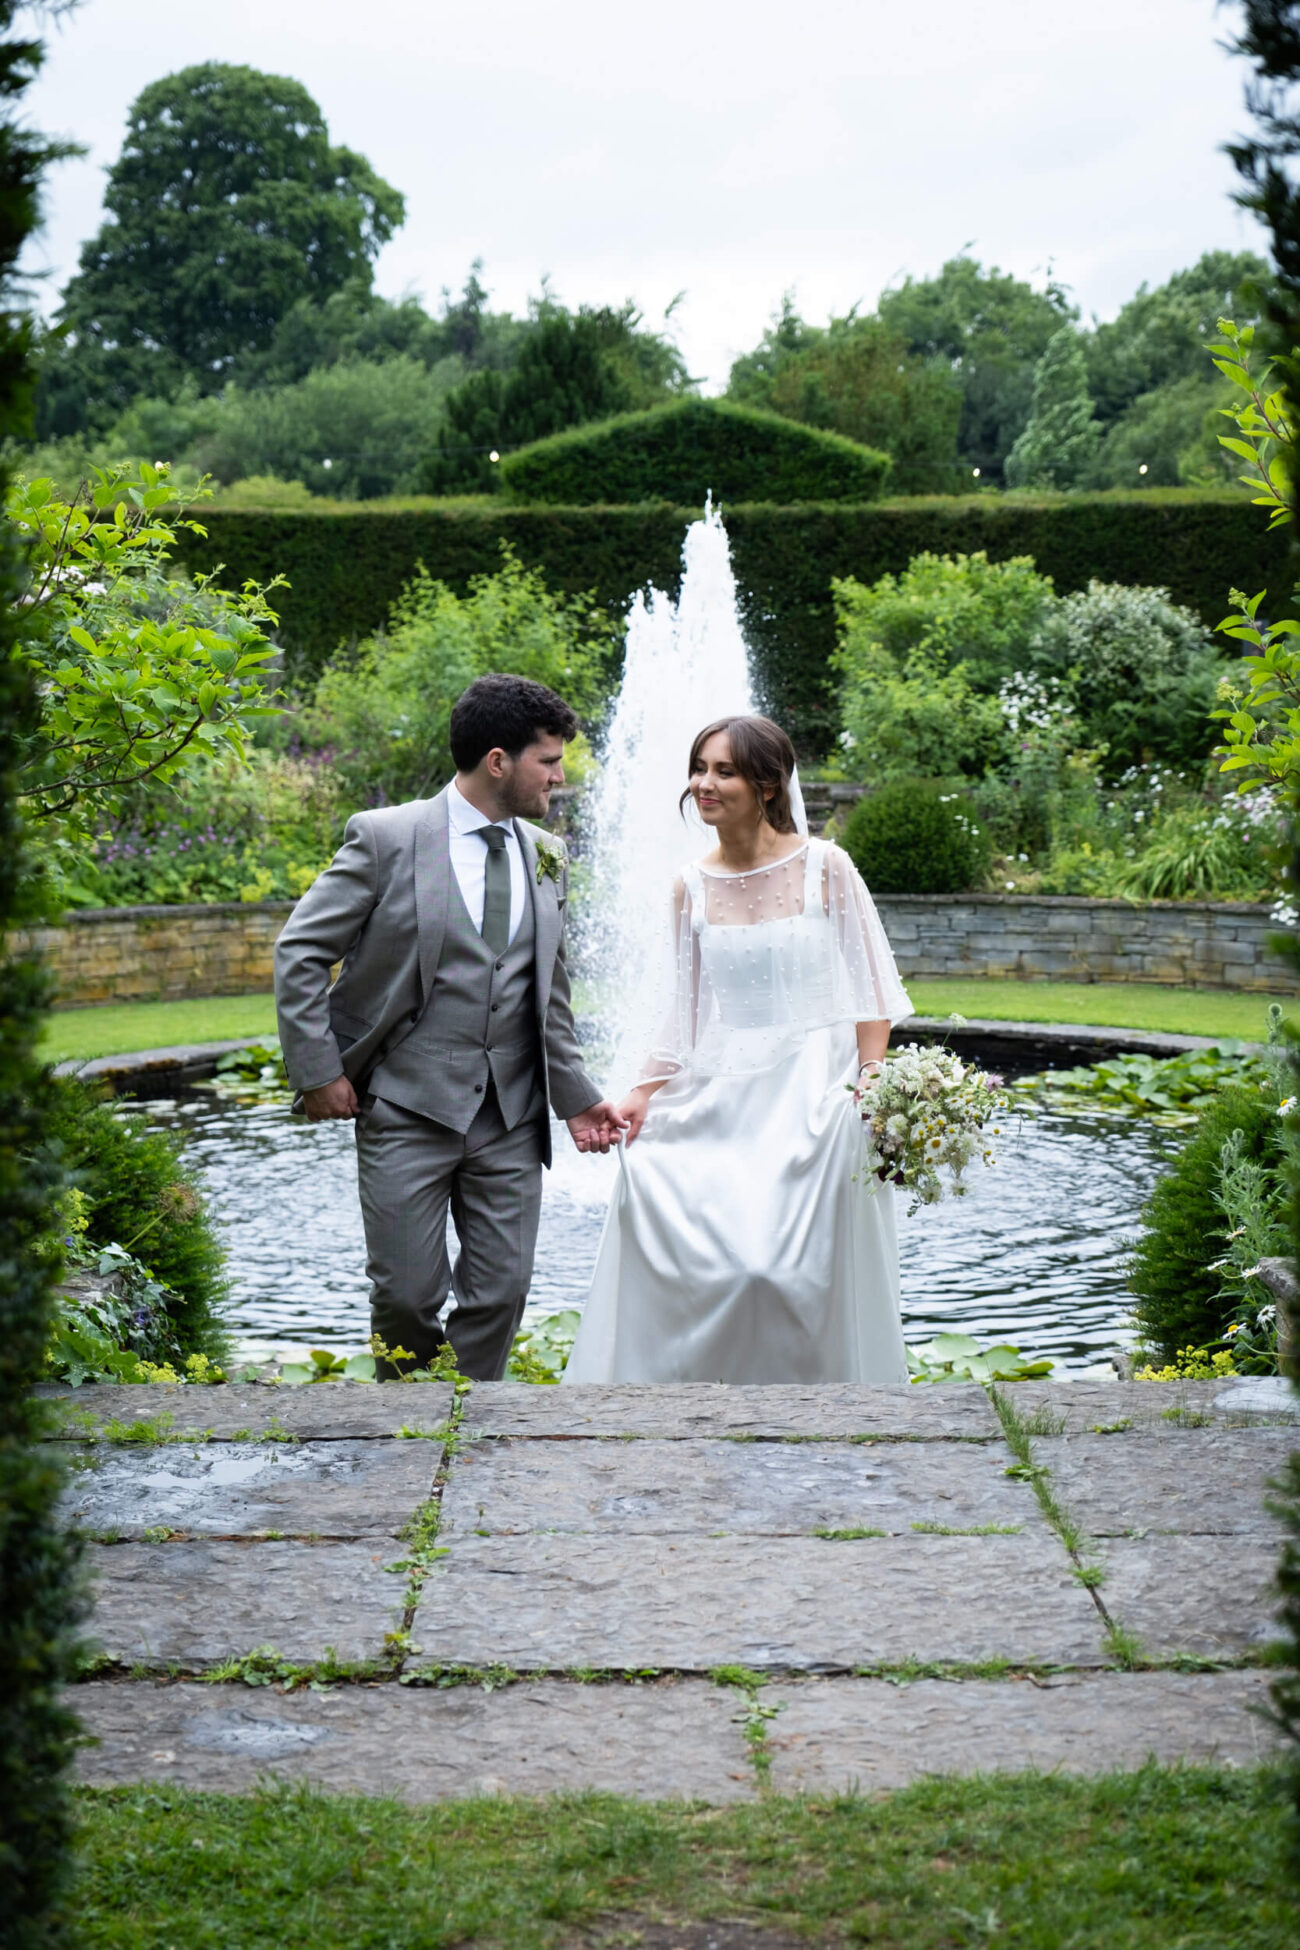 Bride and groom walking hand in hand up the steps of The Fountain Garden of Ballintubbert Gardens and House